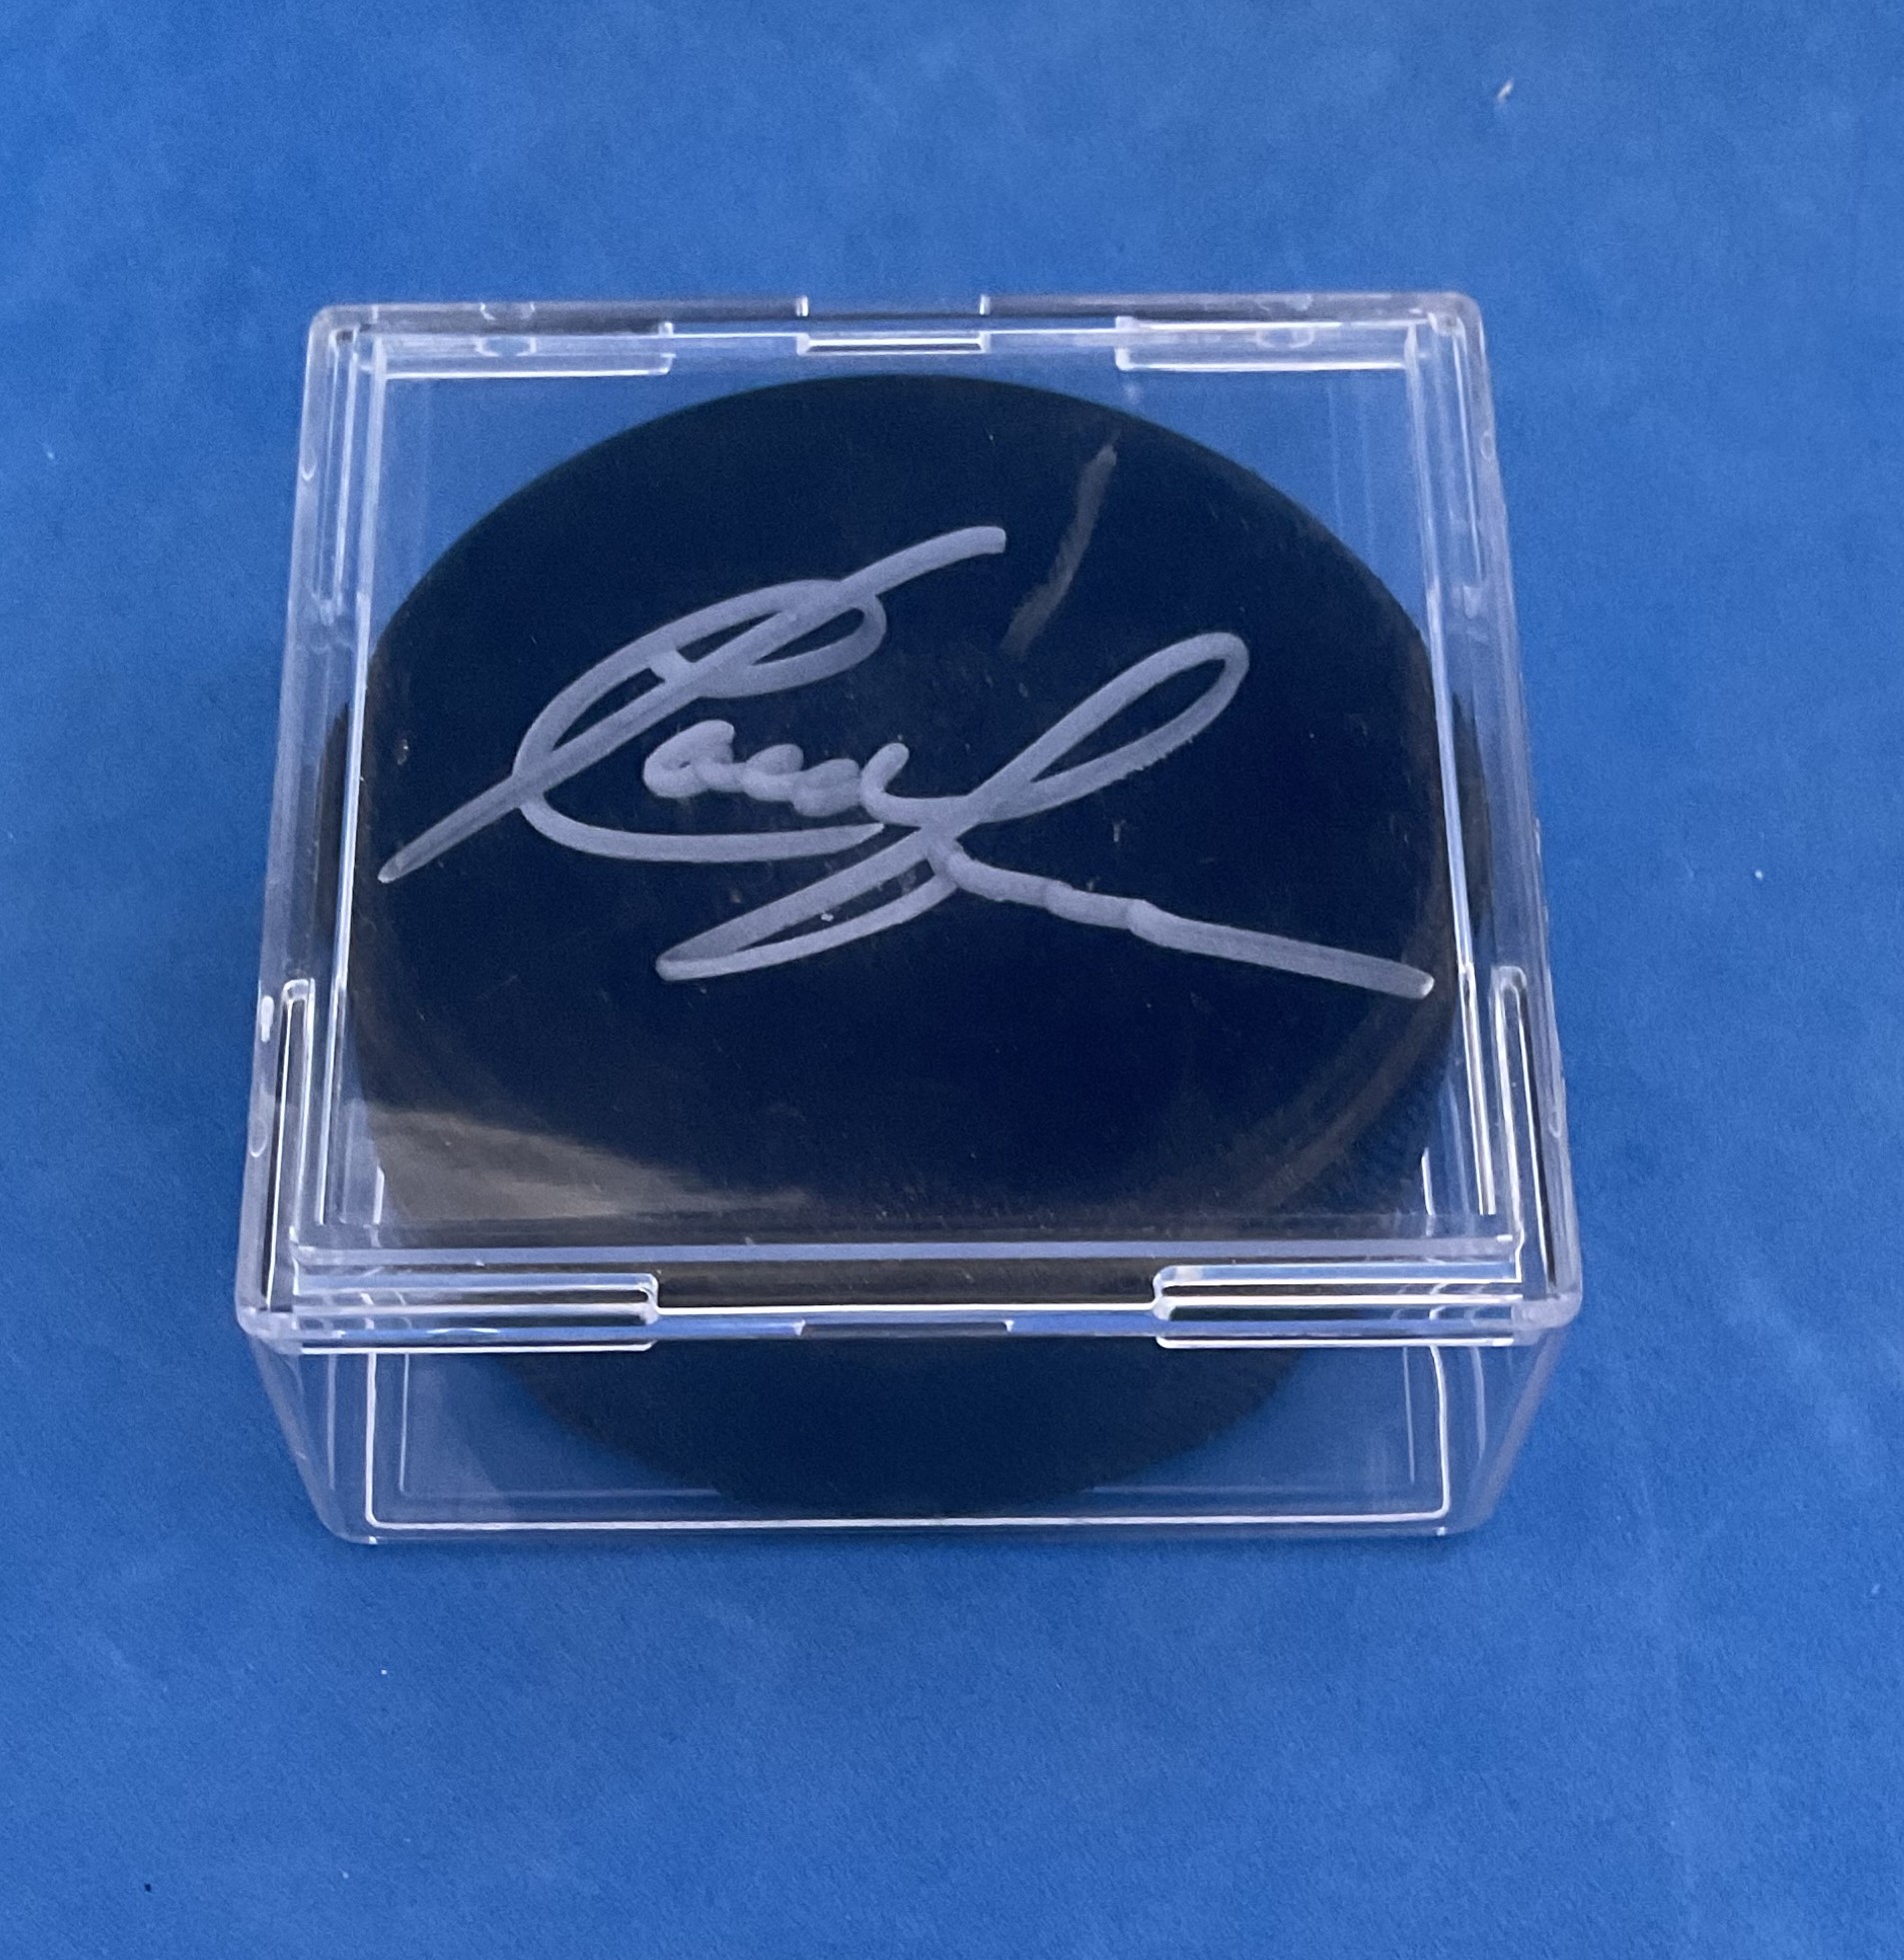 American Ice Hockey Player Claude Lapointe Signed Official NHL Puck. Signed in silver ink. Housed in - Image 2 of 2